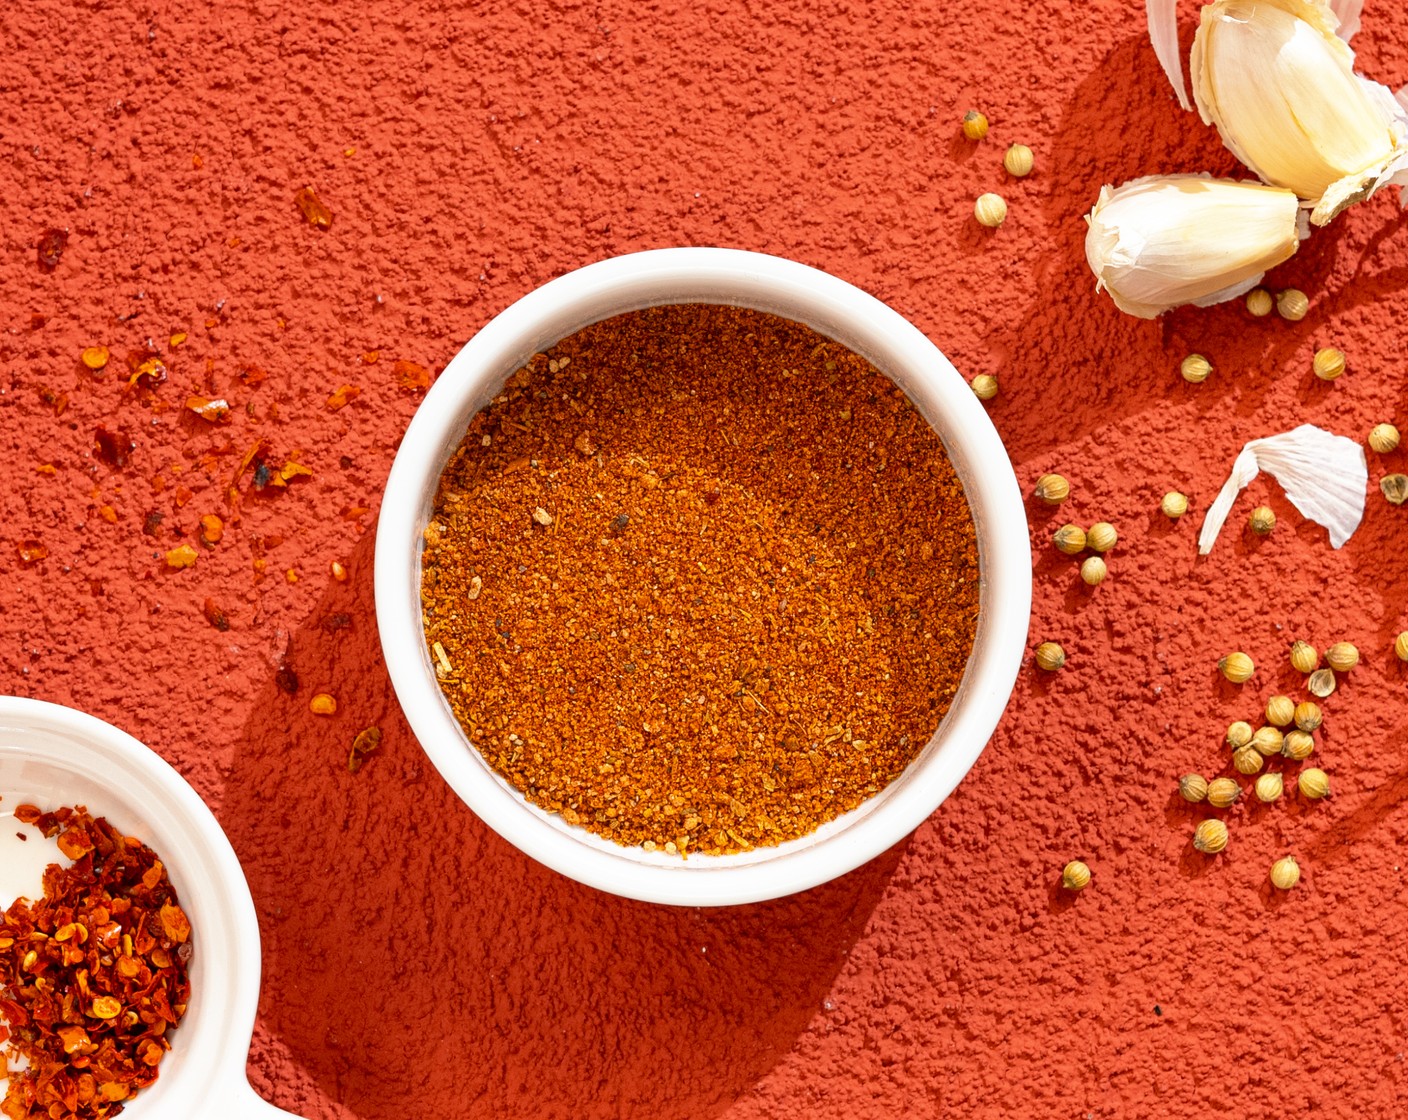 step 1 In a small mixing bowl, add the Dark Brown Sugar (3 Tbsp), Smoked Paprika (3 Tbsp), Coarse Salt (3 Tbsp), McCormick® Garlic Powder (2 Tbsp), Onion Powder (2 Tbsp), Ground Black Pepper (1 Tbsp), Baking Powder (1/2 cup), and Cajun Seasoning (1 1/3 cups) together and mix well. Store in an air-tight container for up to 6 months in a cool, dry place.